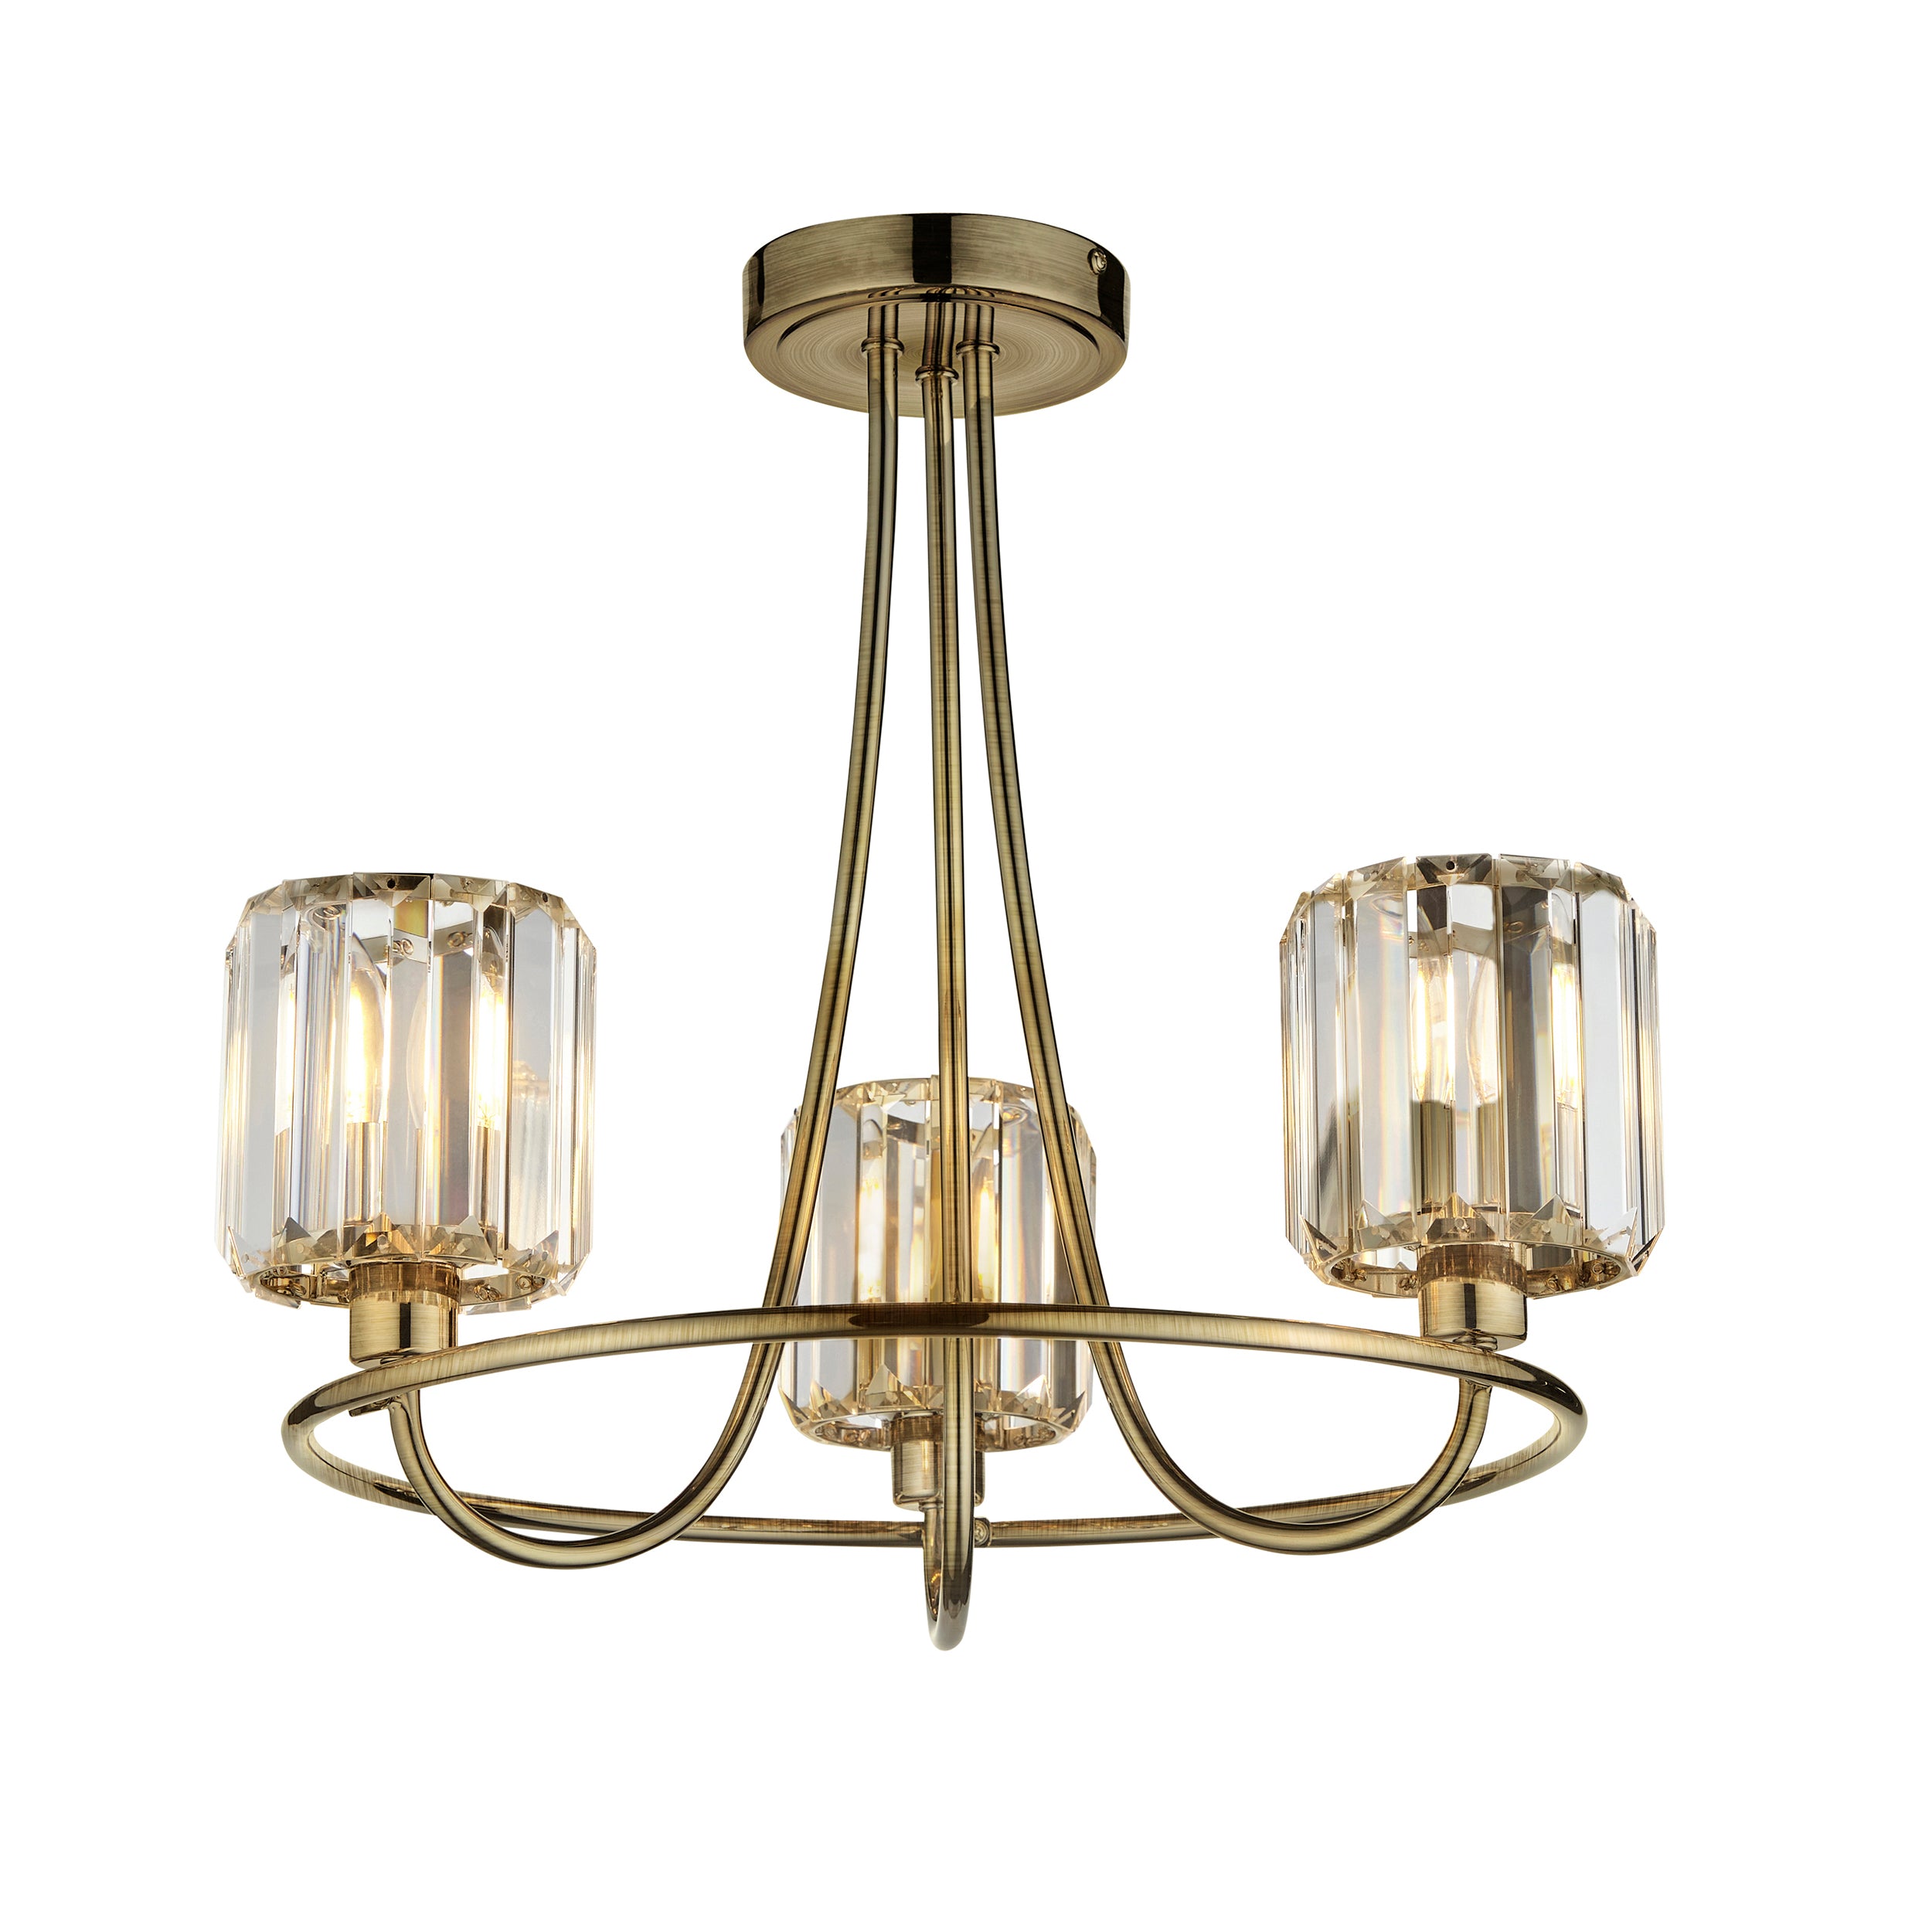 Berenice Sophisticated Antique Brass Ceiling Light